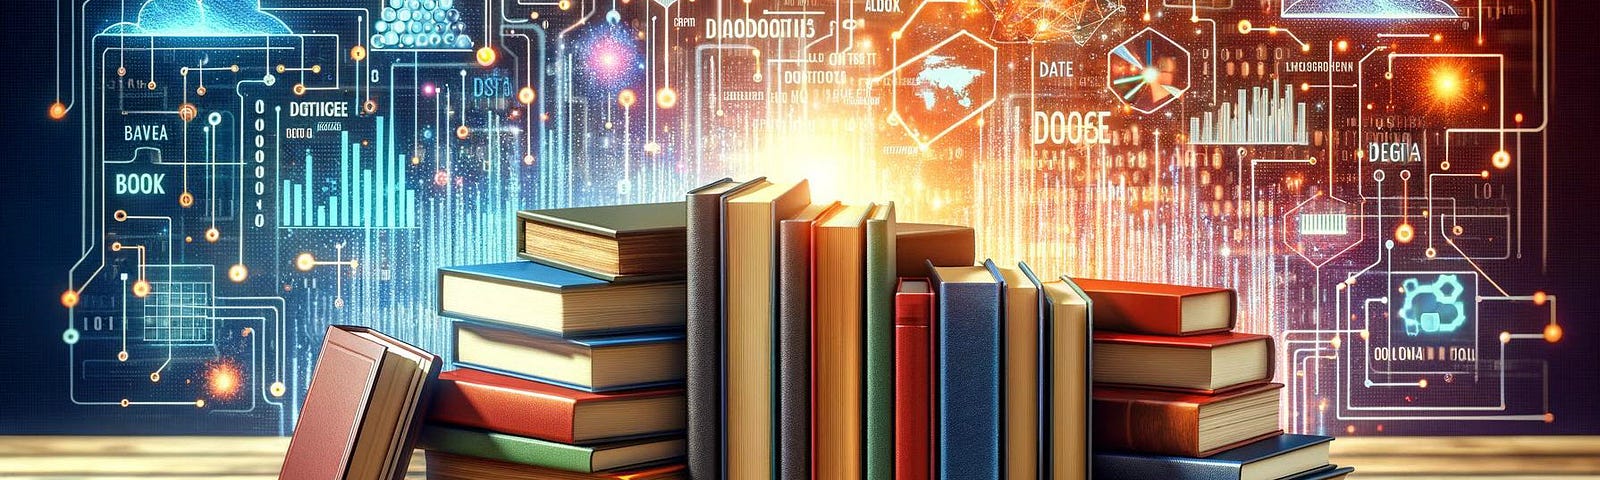 colorful graphic of books with a data science inspired background